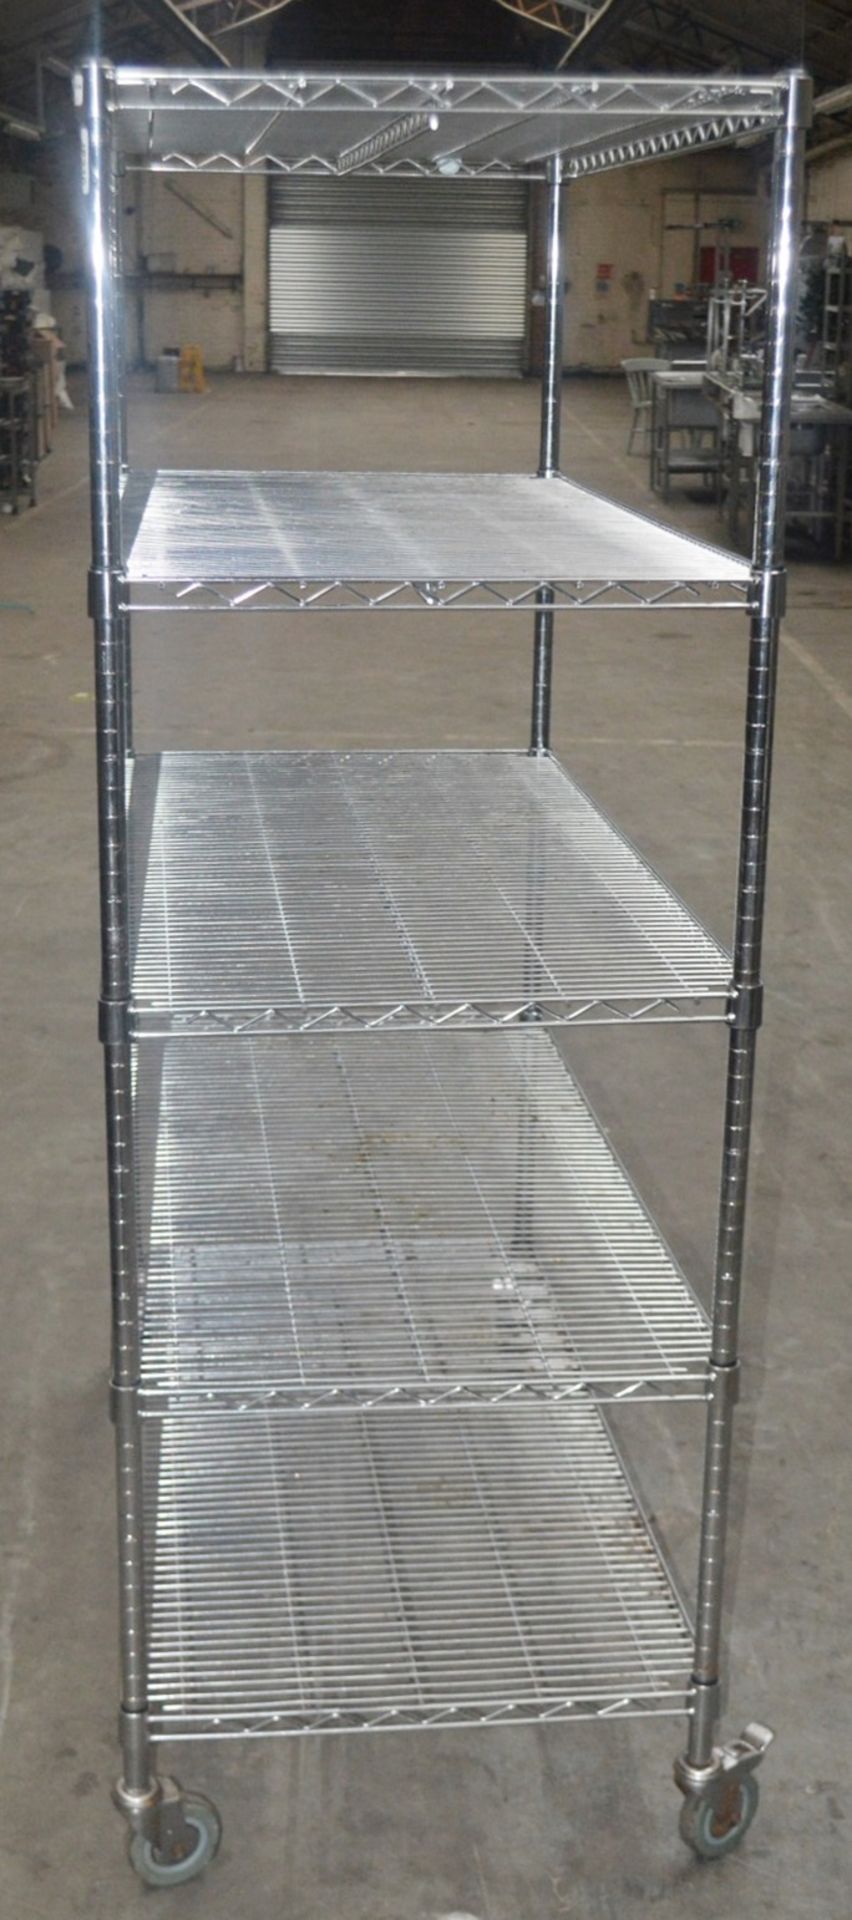 1 x Commercial Kitchen 5-Tier Chrome Wire Shelving Unit - Dimensions: H175 x W120 x D60cm - Very - Image 3 of 4